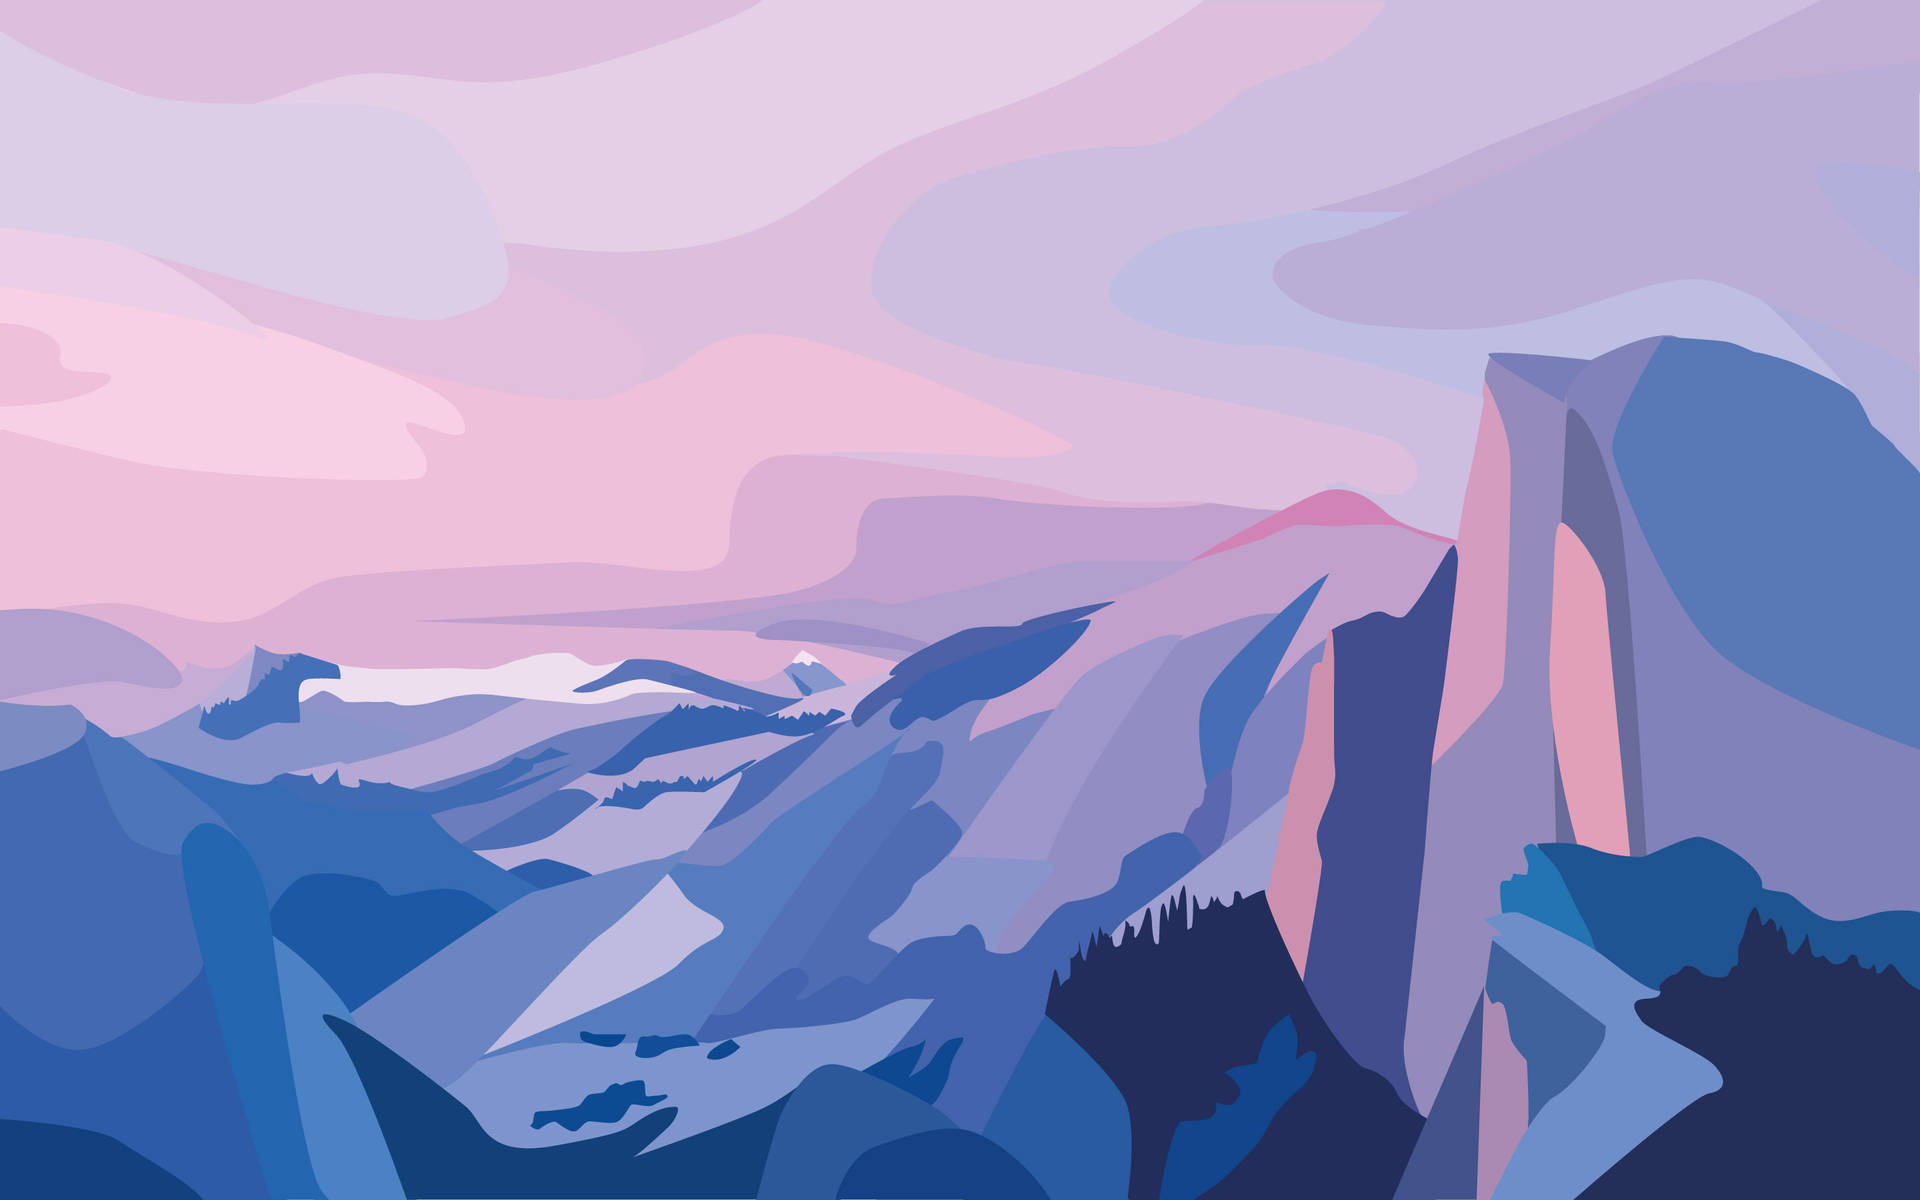 Cute Aesthetic Mountains Digital Illustration Background